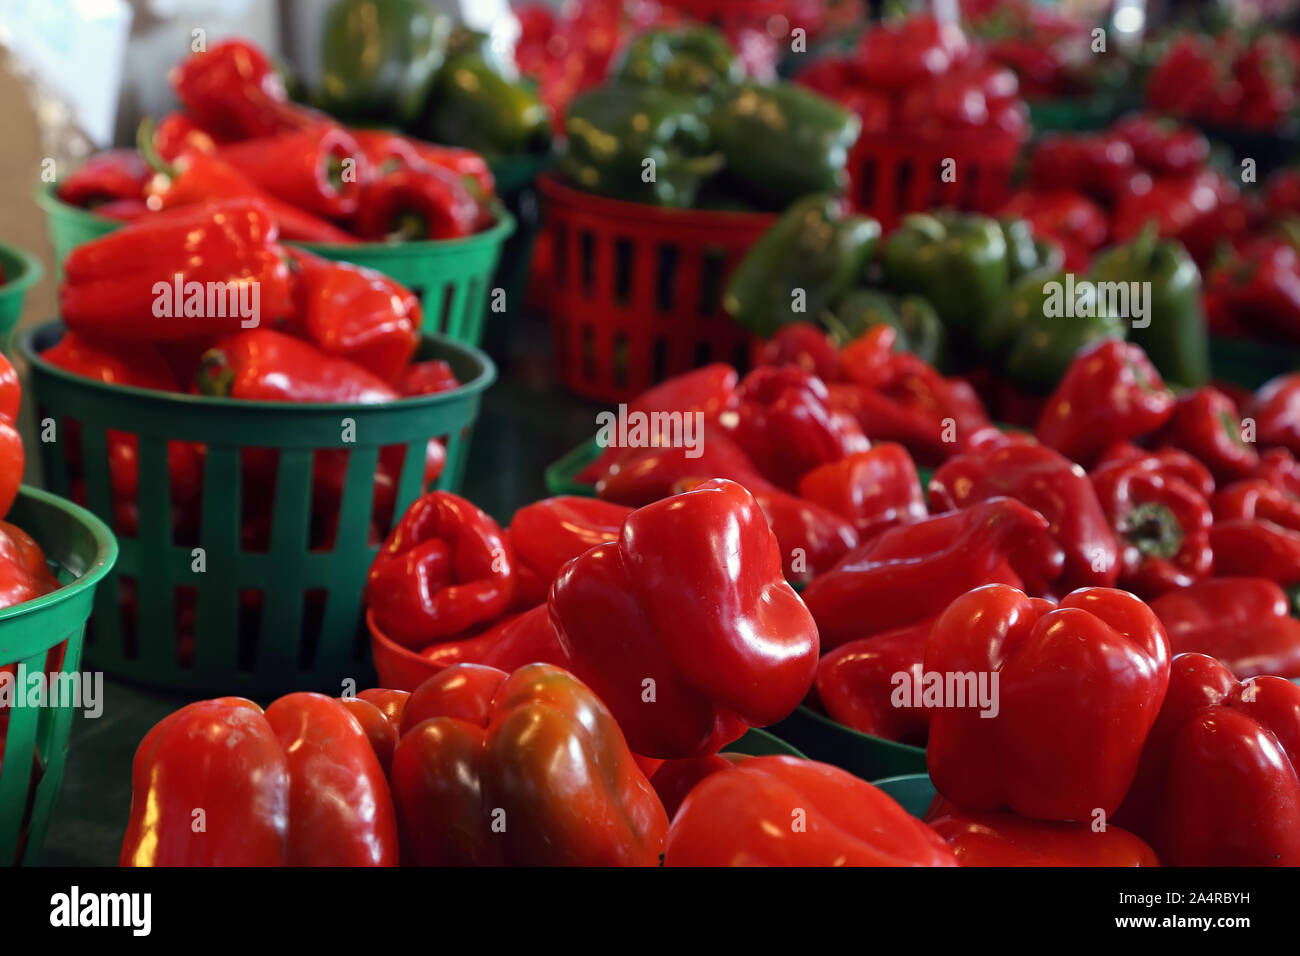 Biologic, natural cultivated sweet pepper on a market counter. Vegetables from the farmers market. Ecologic products. Natural background. Stock Photo